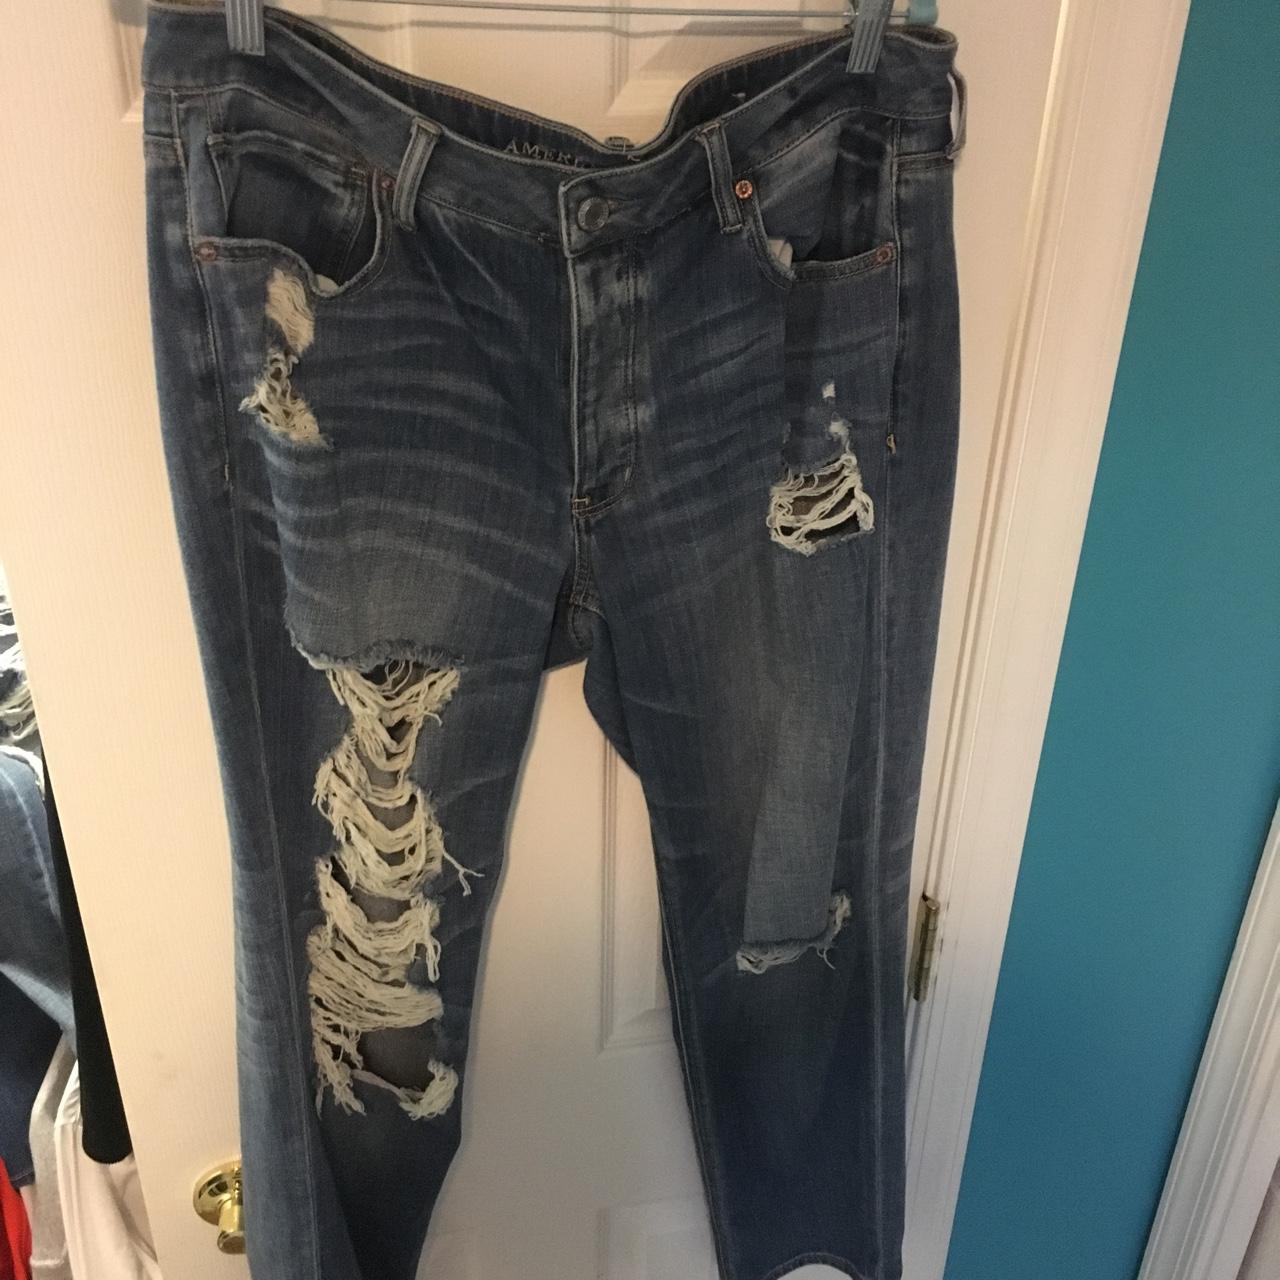 Cute ripped jeans from American Eagle! Fit true to